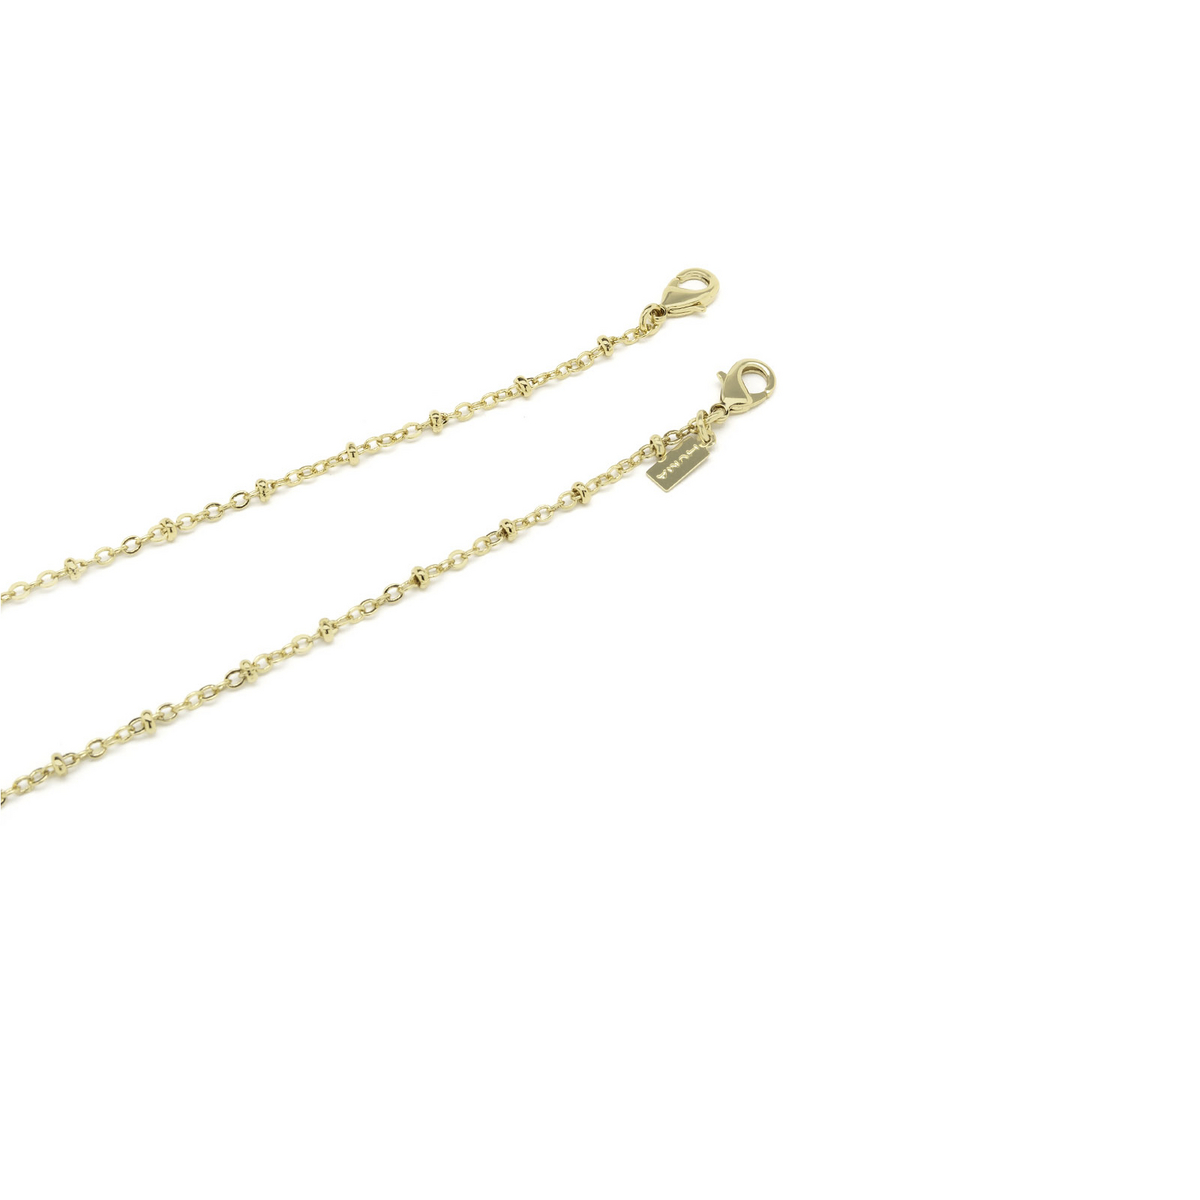 Huma® Accessories: Chain With Metal Pearl color Gold L03 - product thumbnail 1/3.